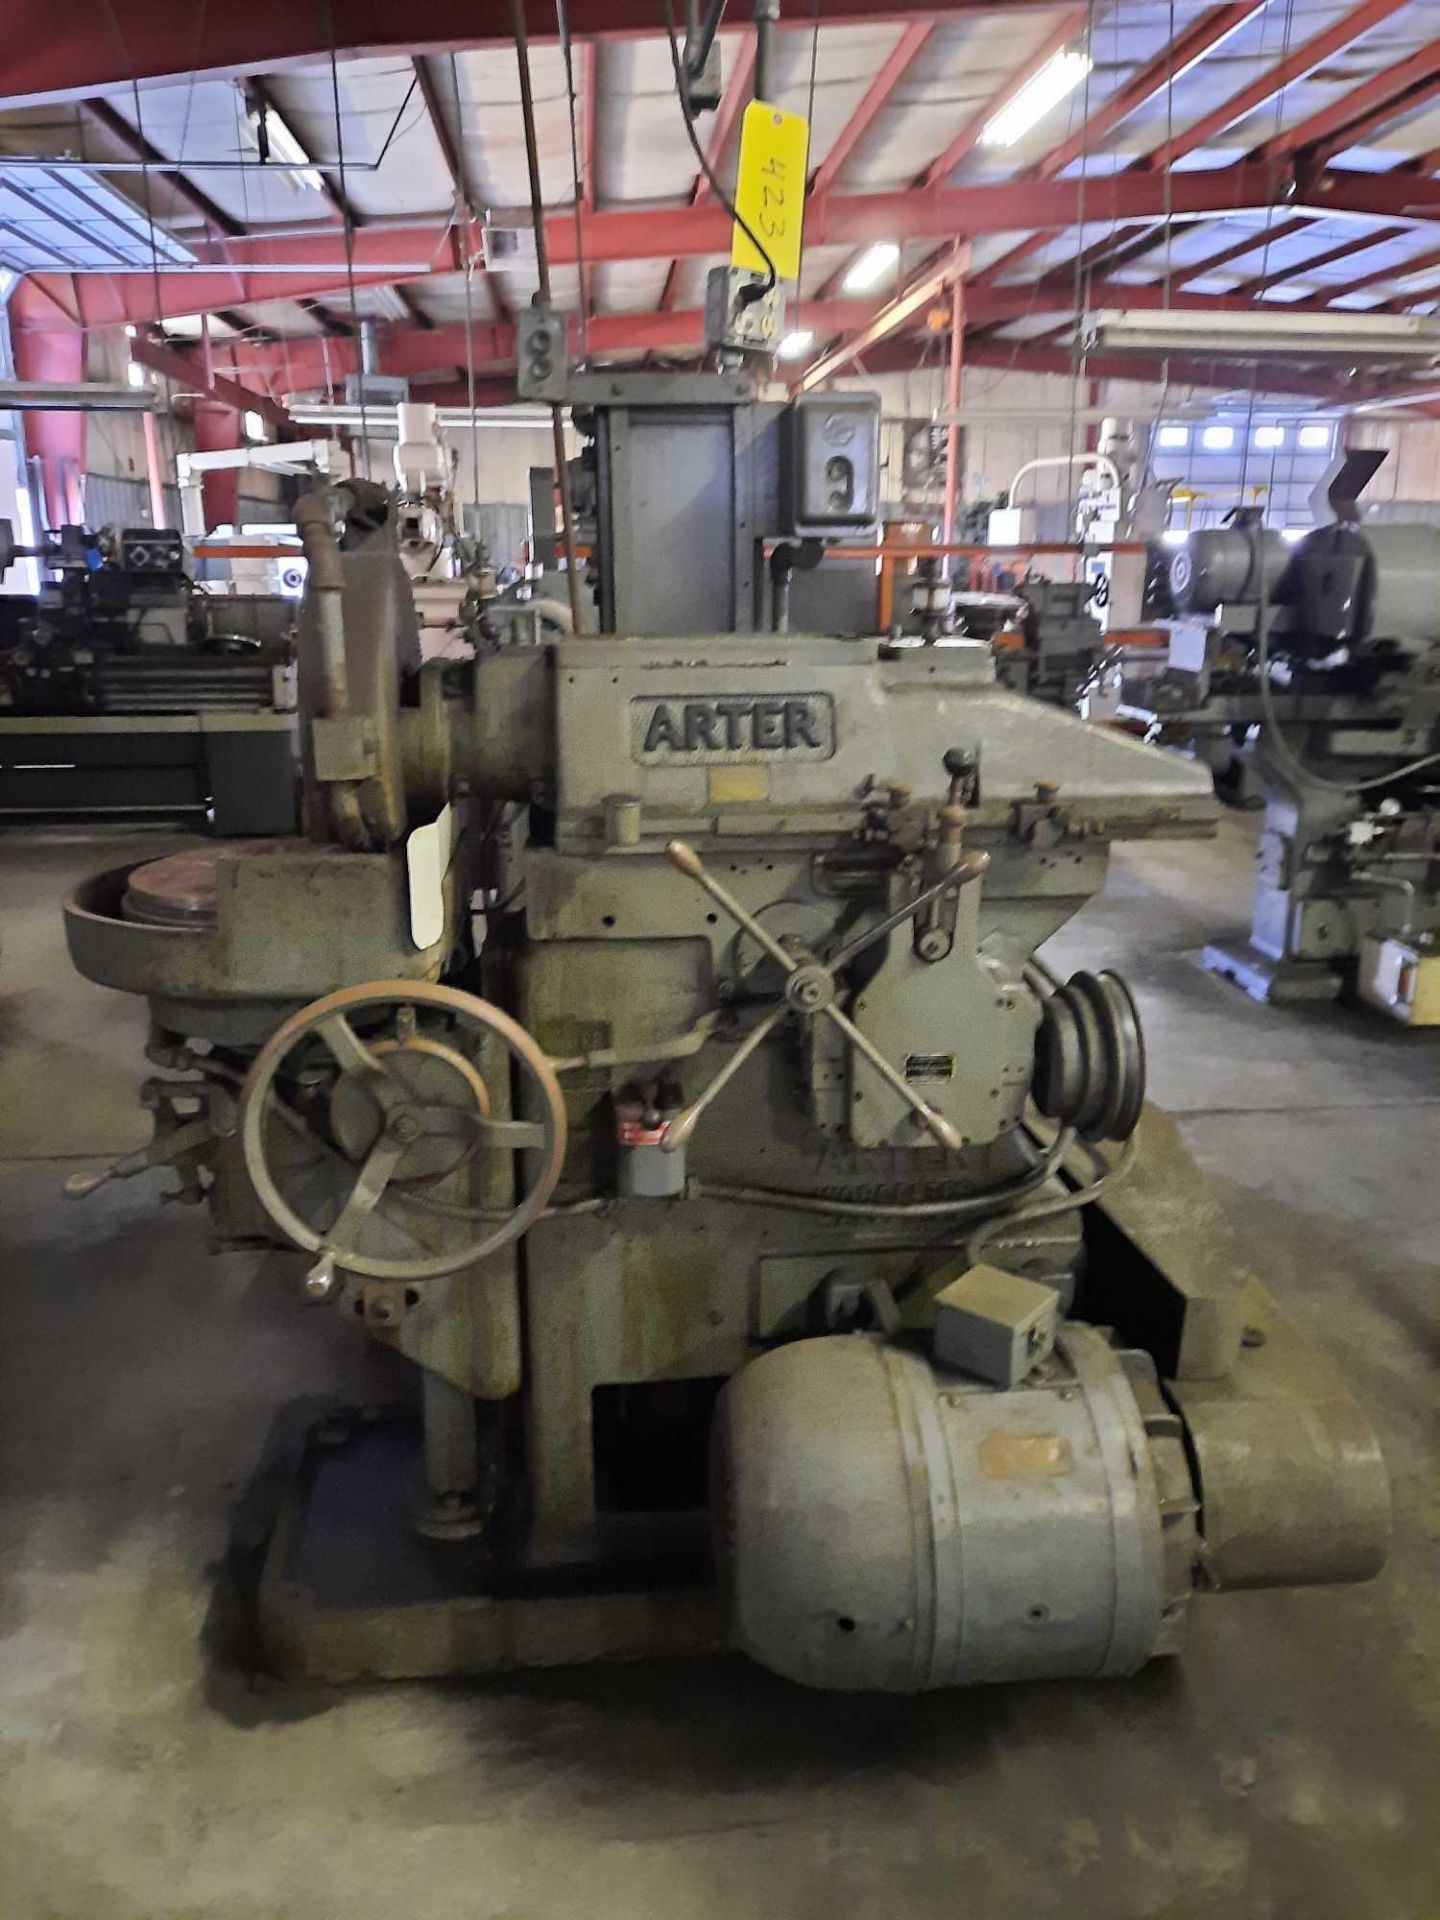 Arter rotary grinder, model A-1-12, serial 603, 14 inch chuck, overall dimensions 66 x 43 x 70